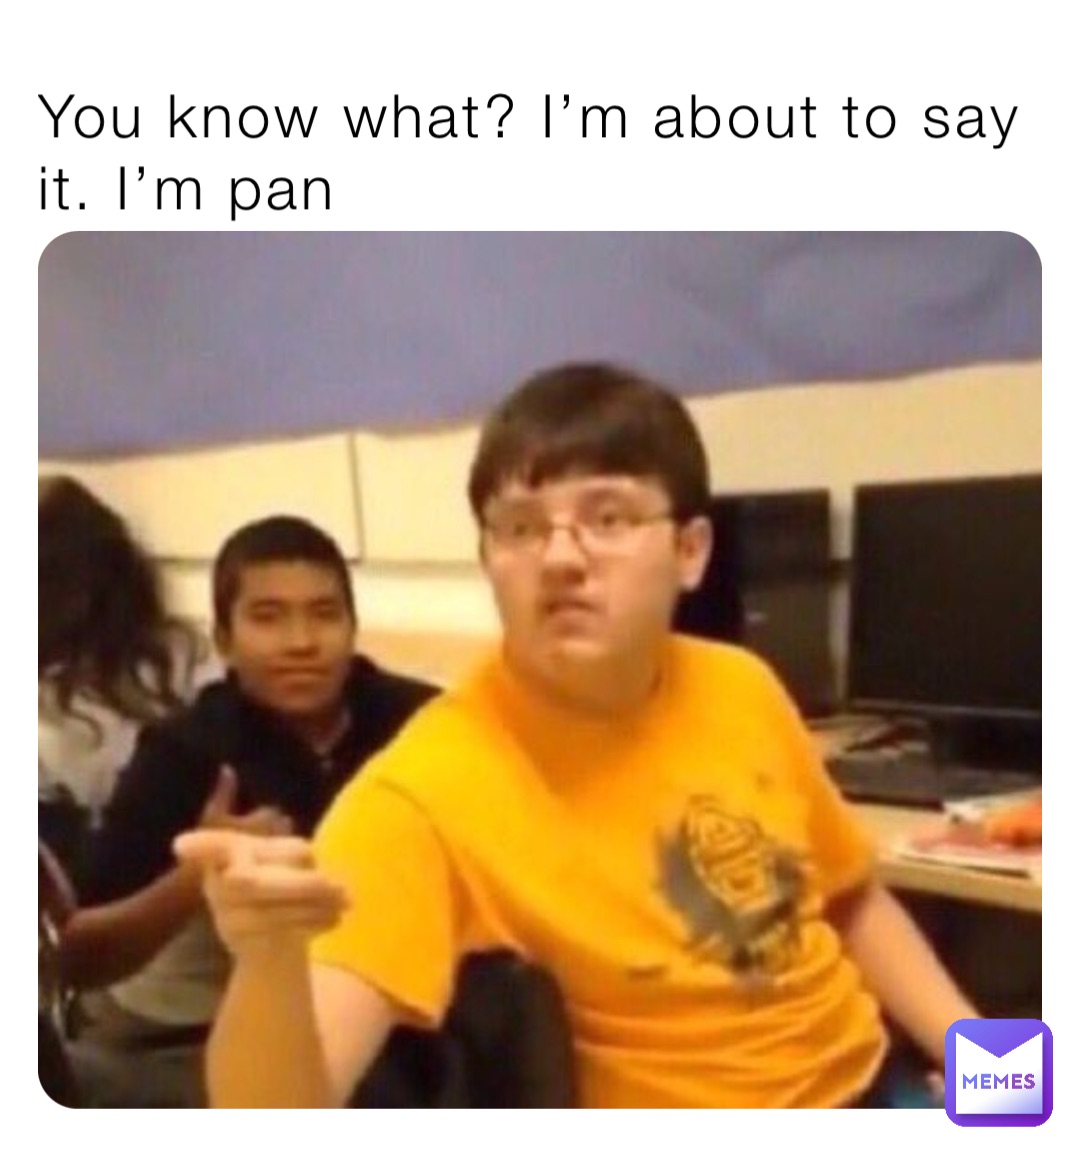 You know what? I’m about to say it. I’m pan